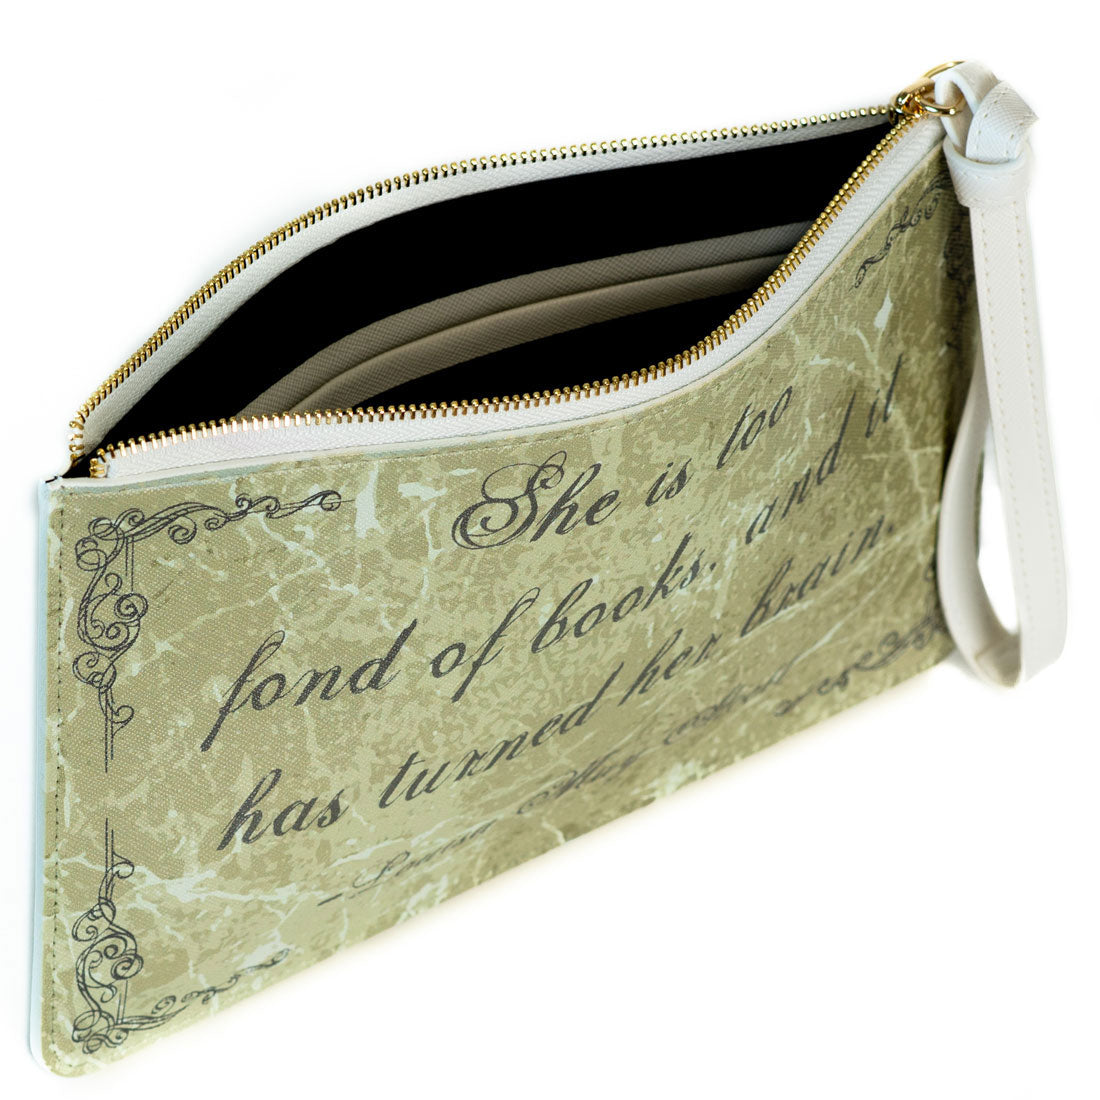 Louisa May Alcott Book Clutch - Storiarts